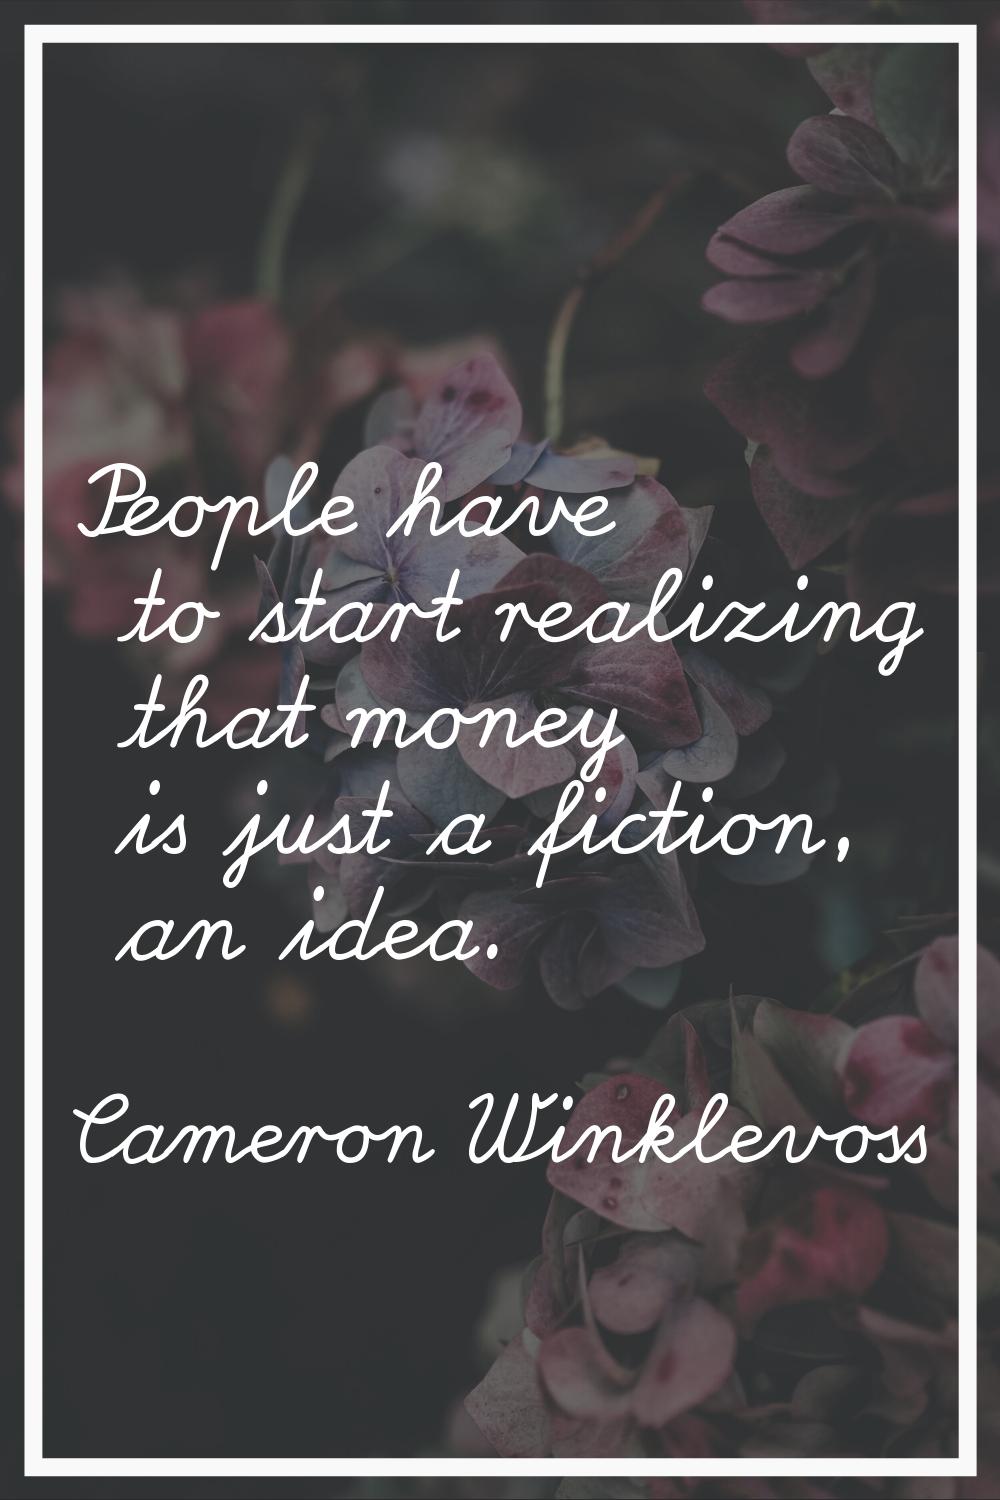 People have to start realizing that money is just a fiction, an idea.